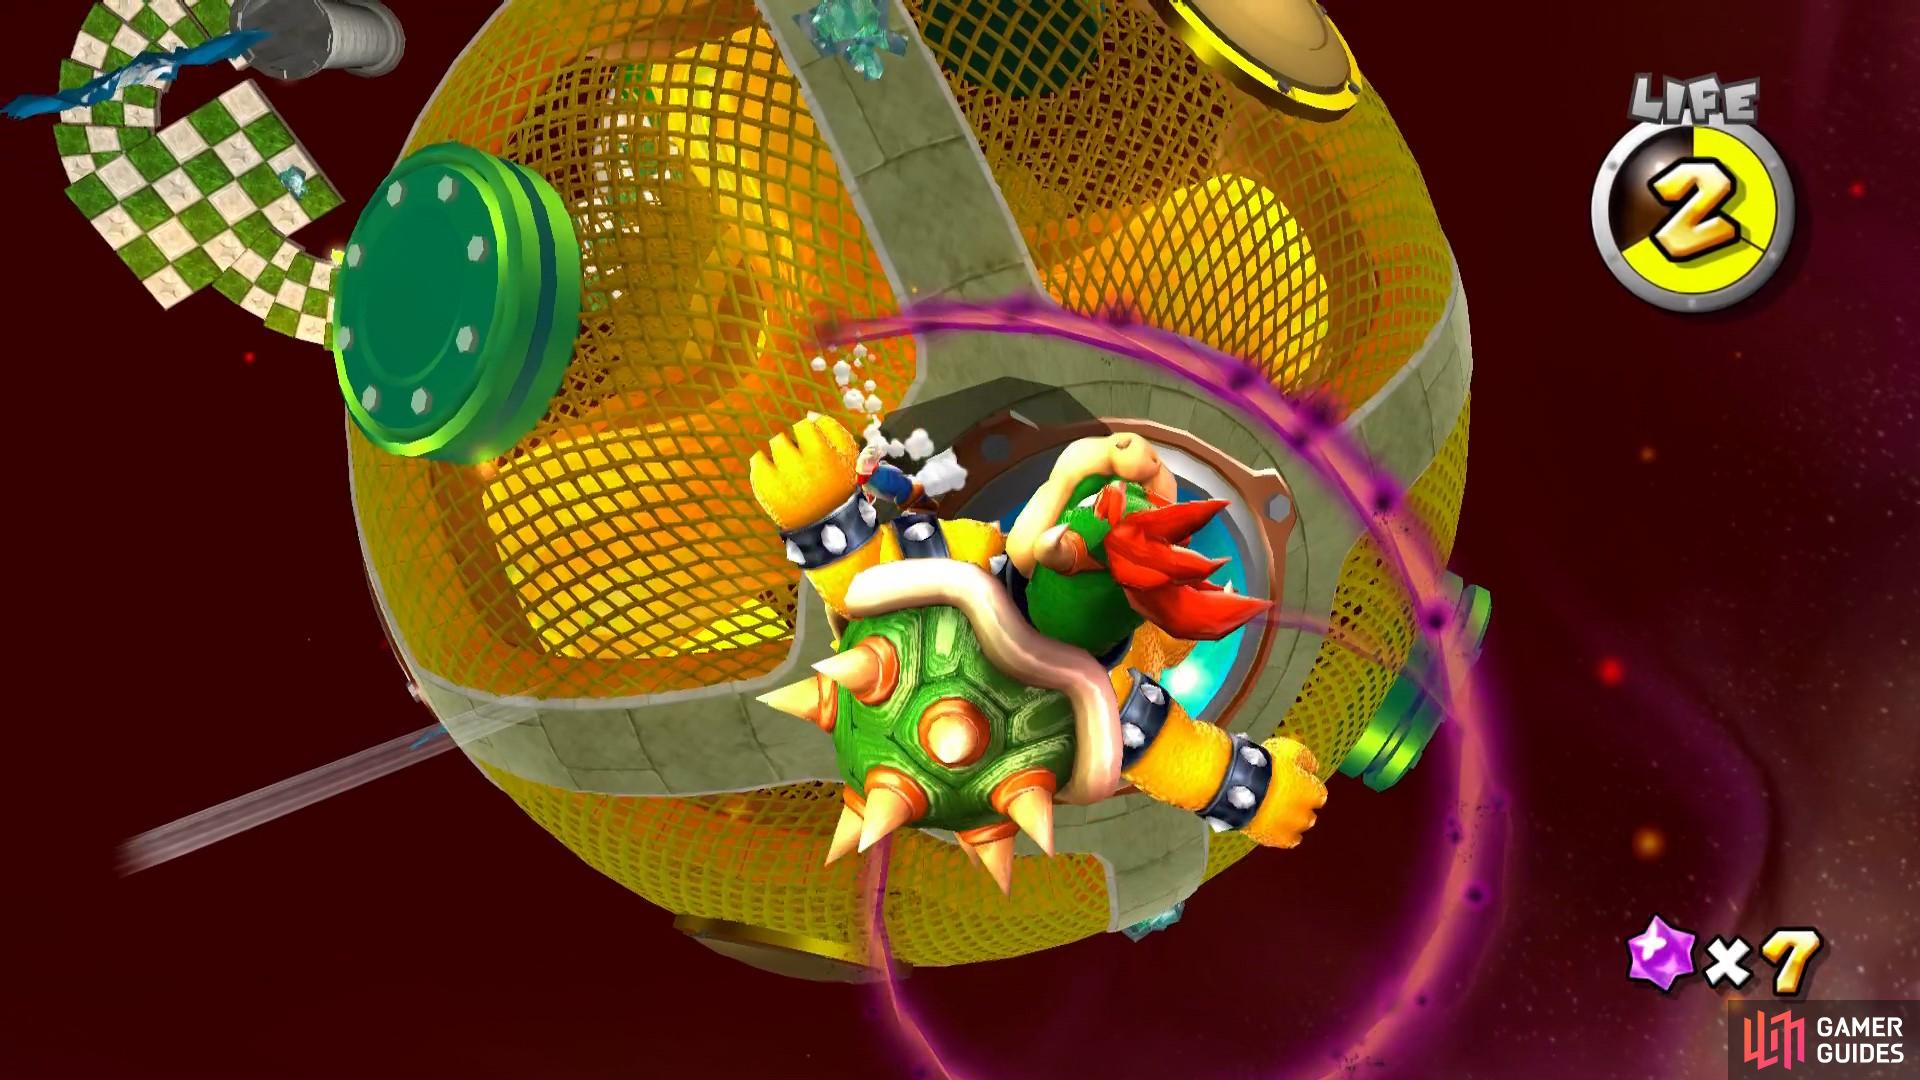 The Dark Spin attack is a new addition to Bowser’s attack moves.